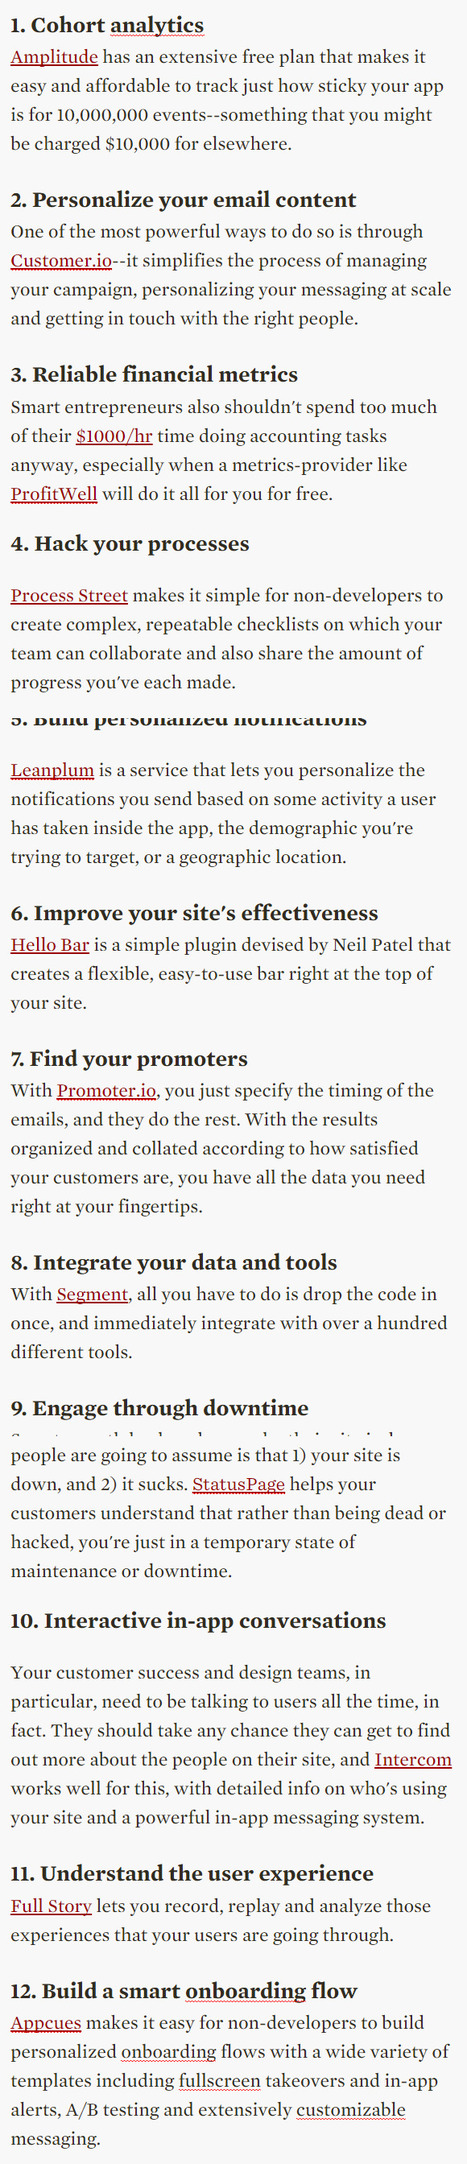 12 Free Tools for Smart Growth Hackers - Inc. | digital marketing strategy | Scoop.it